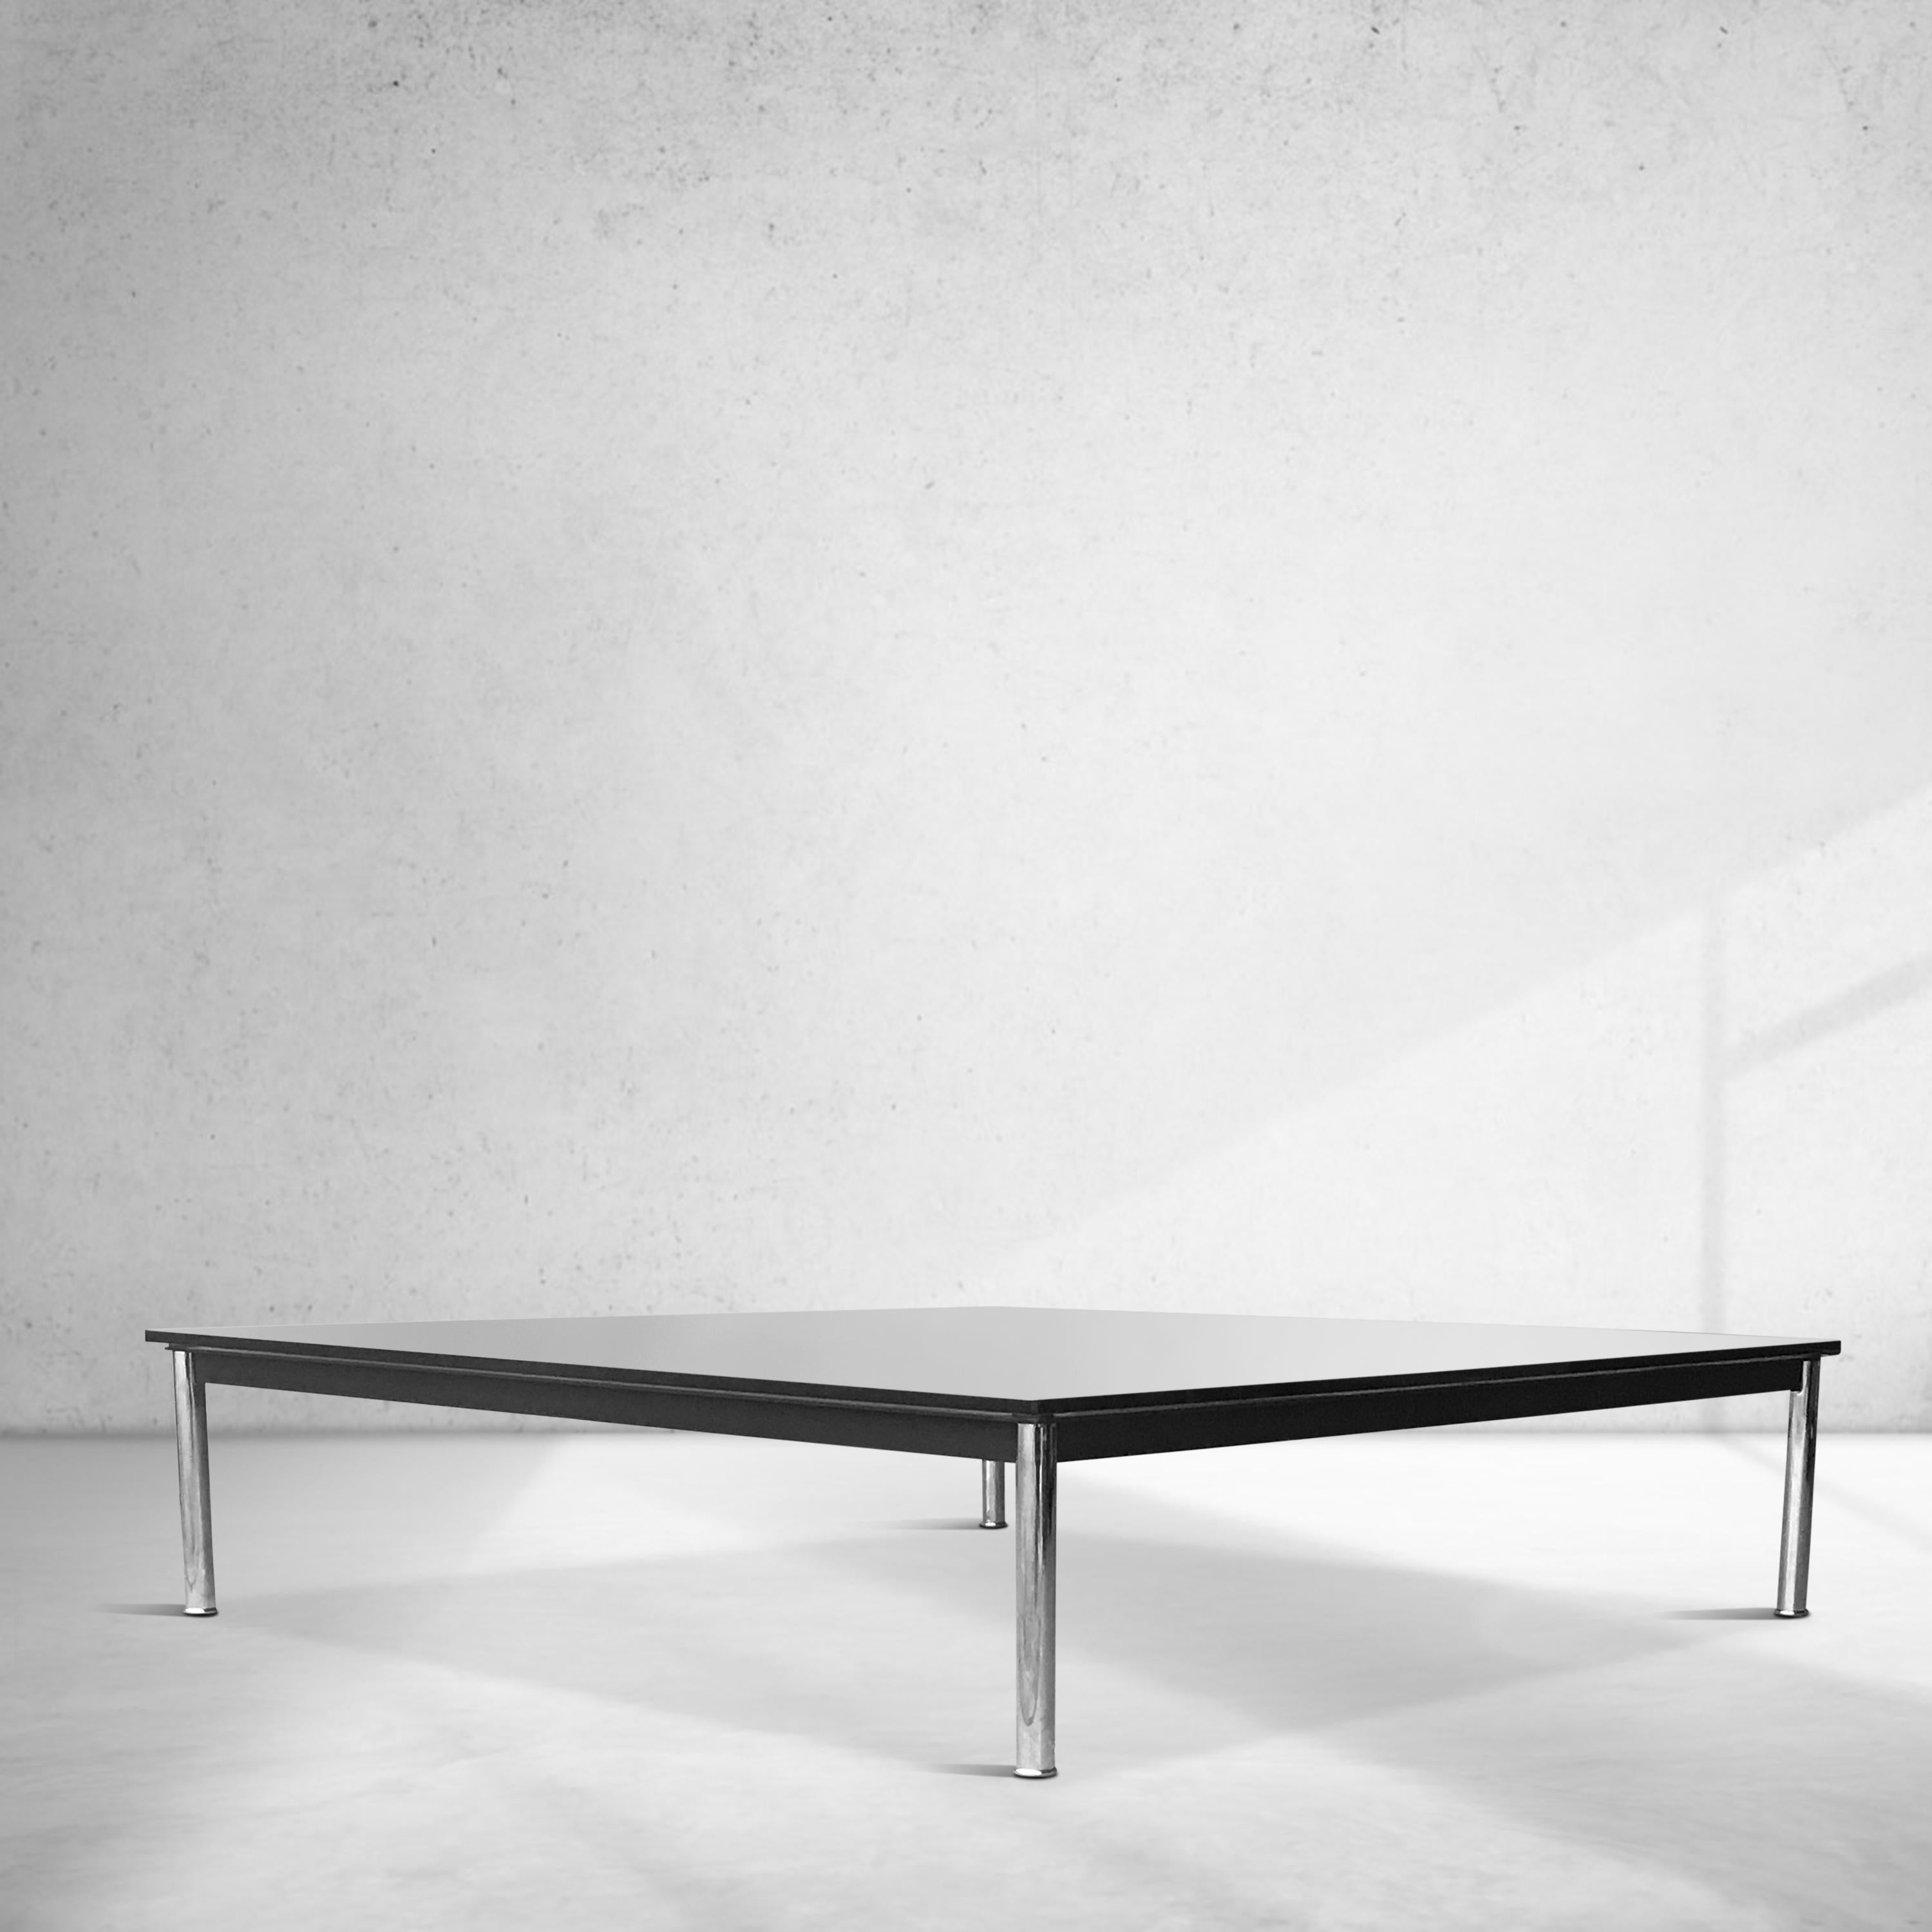 Classic LC10 coffee table by Le Corbusier, Pierre Jeanneret and Charlotte Perriand for Cassina.

1990s production, with original markings on the side of the frame, in the largest 140  x 140 variant.

Original purchase invoice comes with the table.
